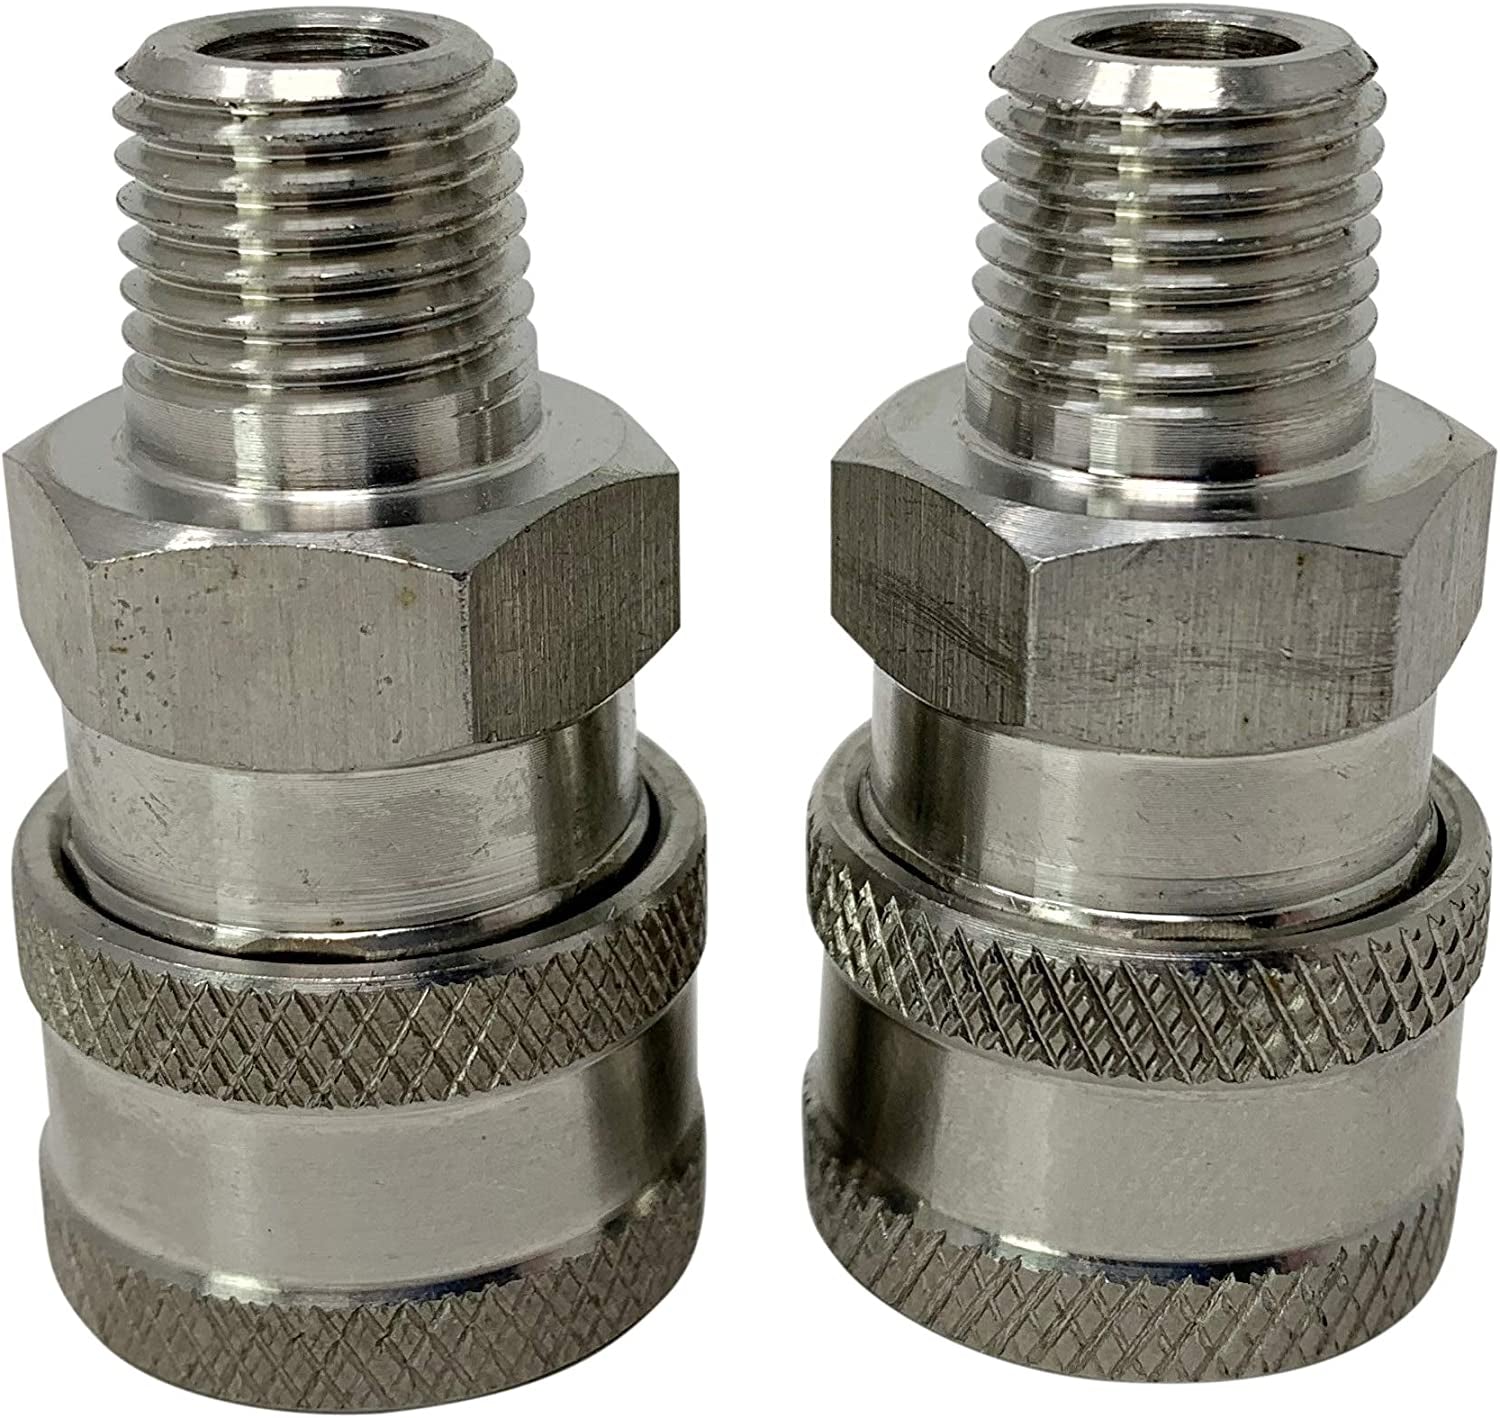 ESSENTIAL WASHER, ESSENTIAL WASHER Pressure Washer Fittings 3/8" Stainless Steel Male NPT Quick Connect Couplers - 2-Pack Fitting Set (3/8 Inch MPT - Set of 2)